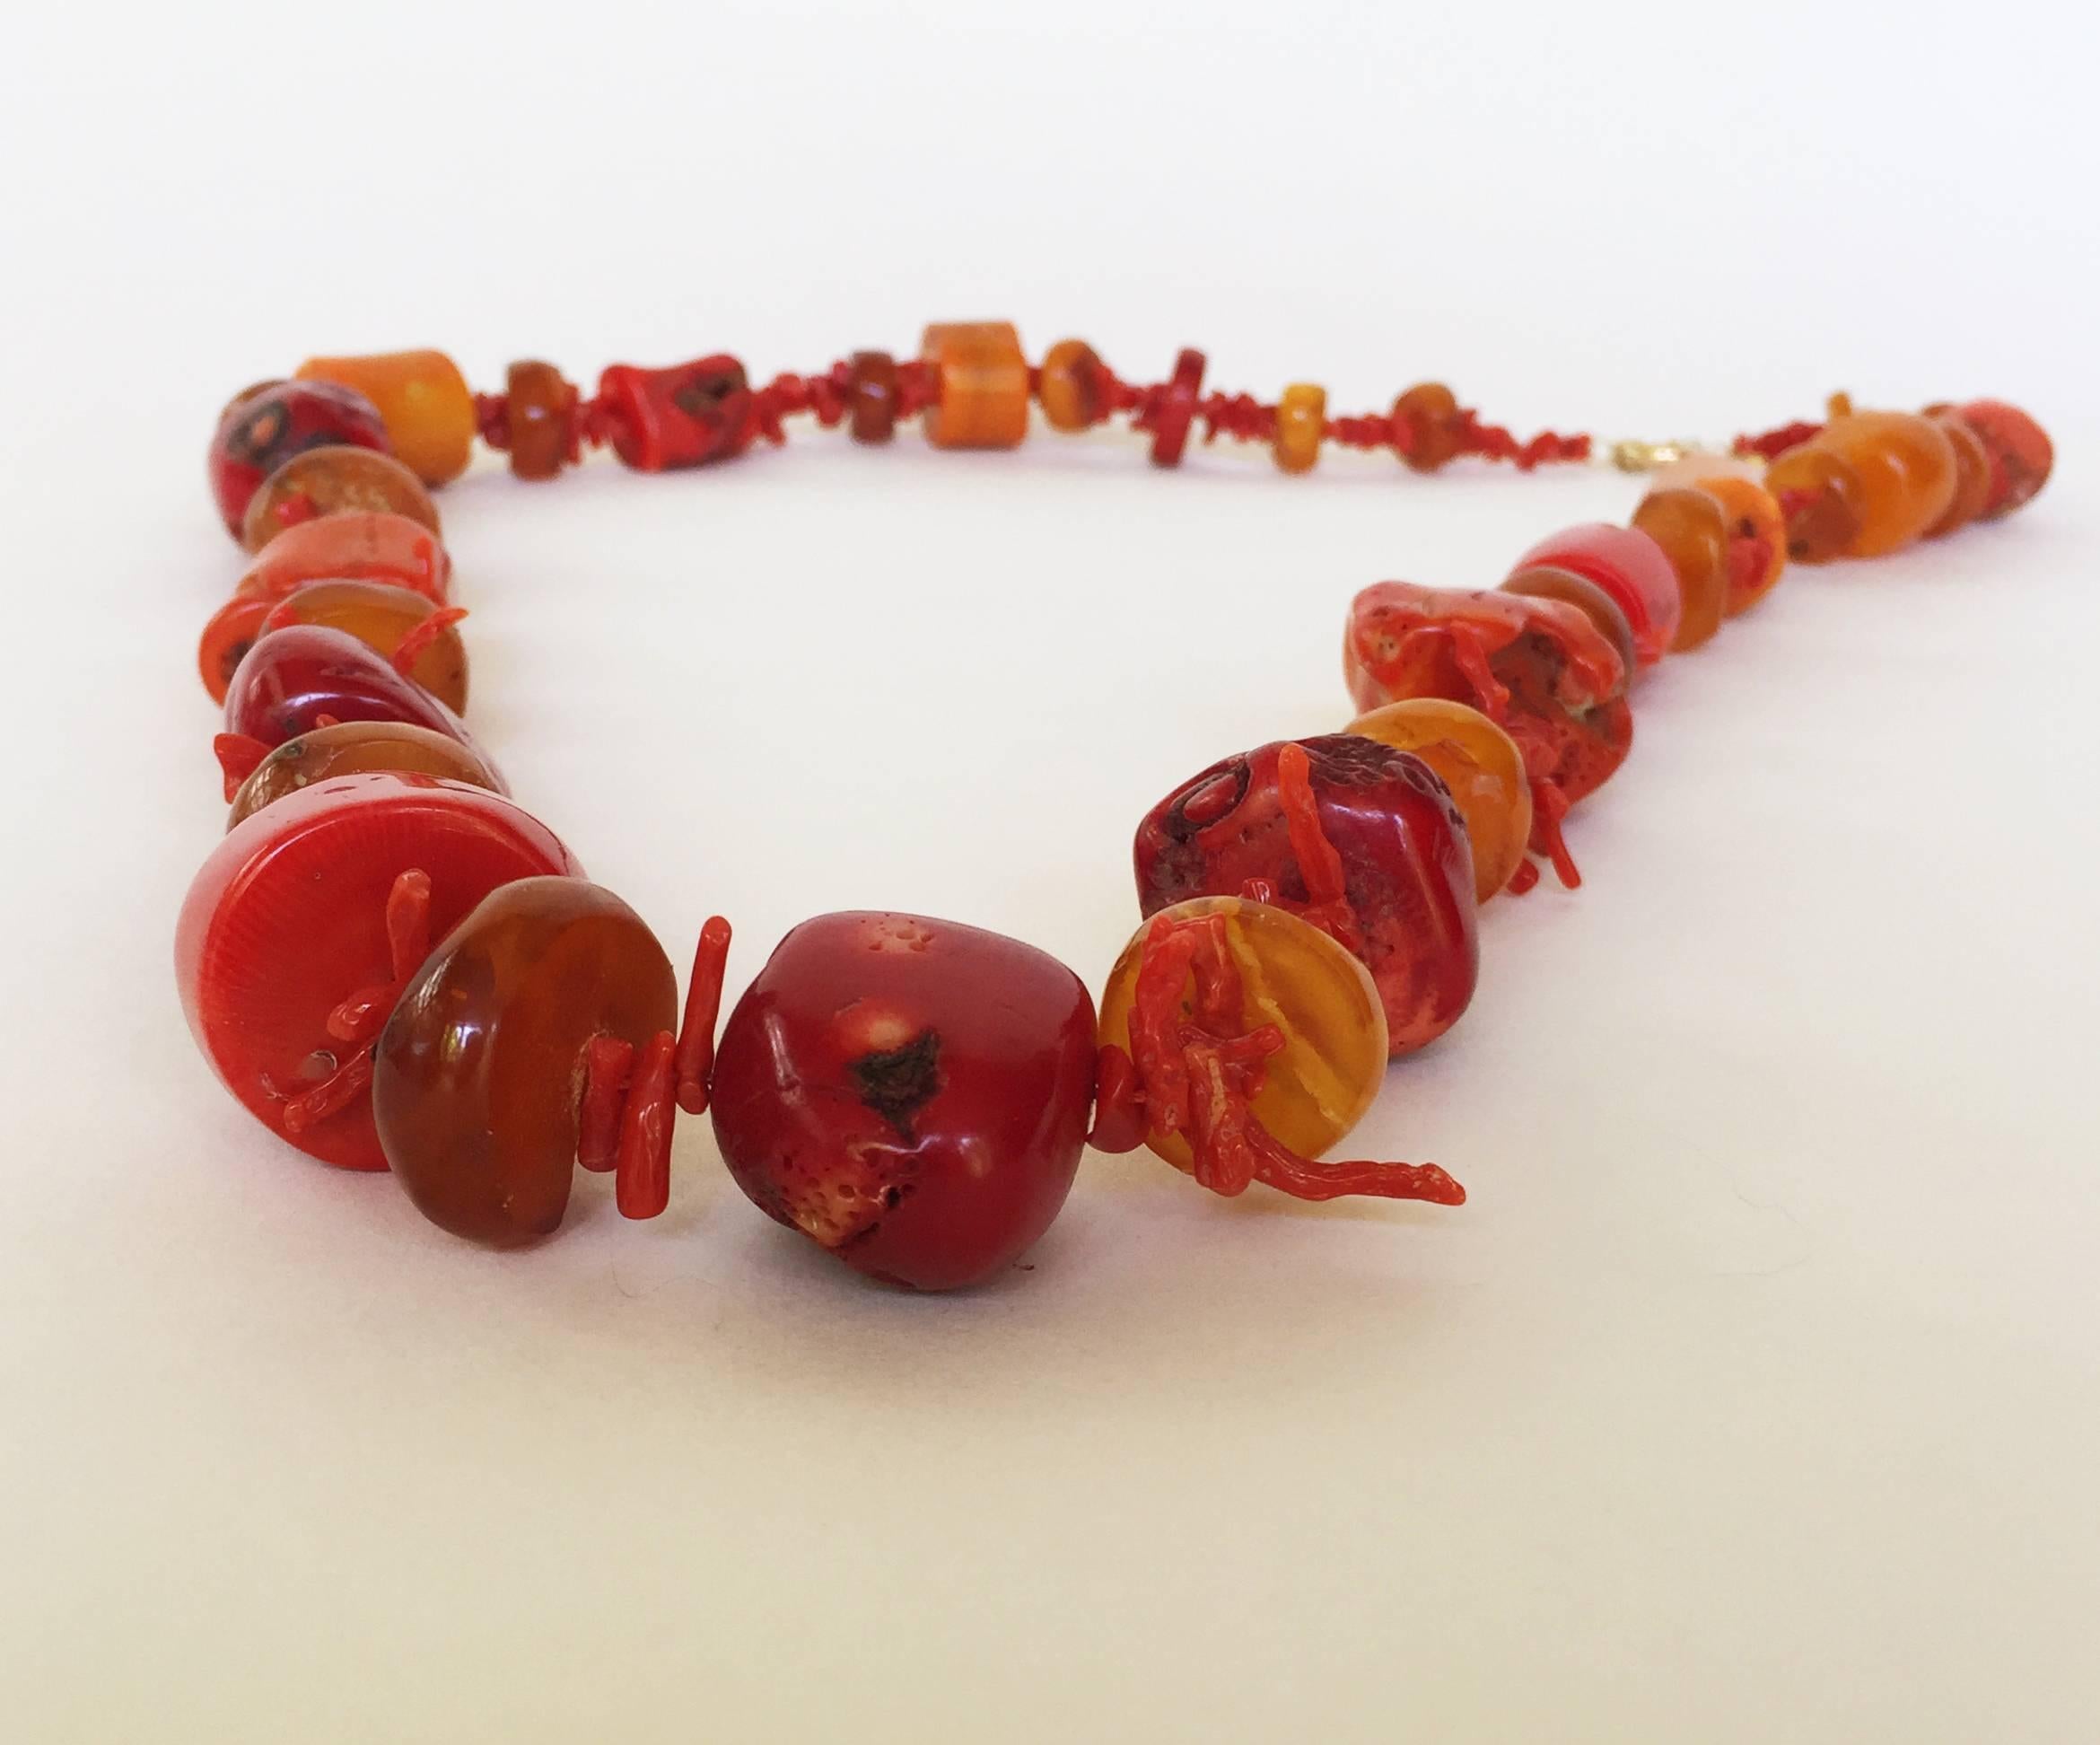 This statement necklace by Marina J is strung with graduated Middle Eastern coral and Russian amber beads, held together by a 14k yellow gold secured clasp. The necklace's large and authentic beads give the necklace a weighty look, but it is not